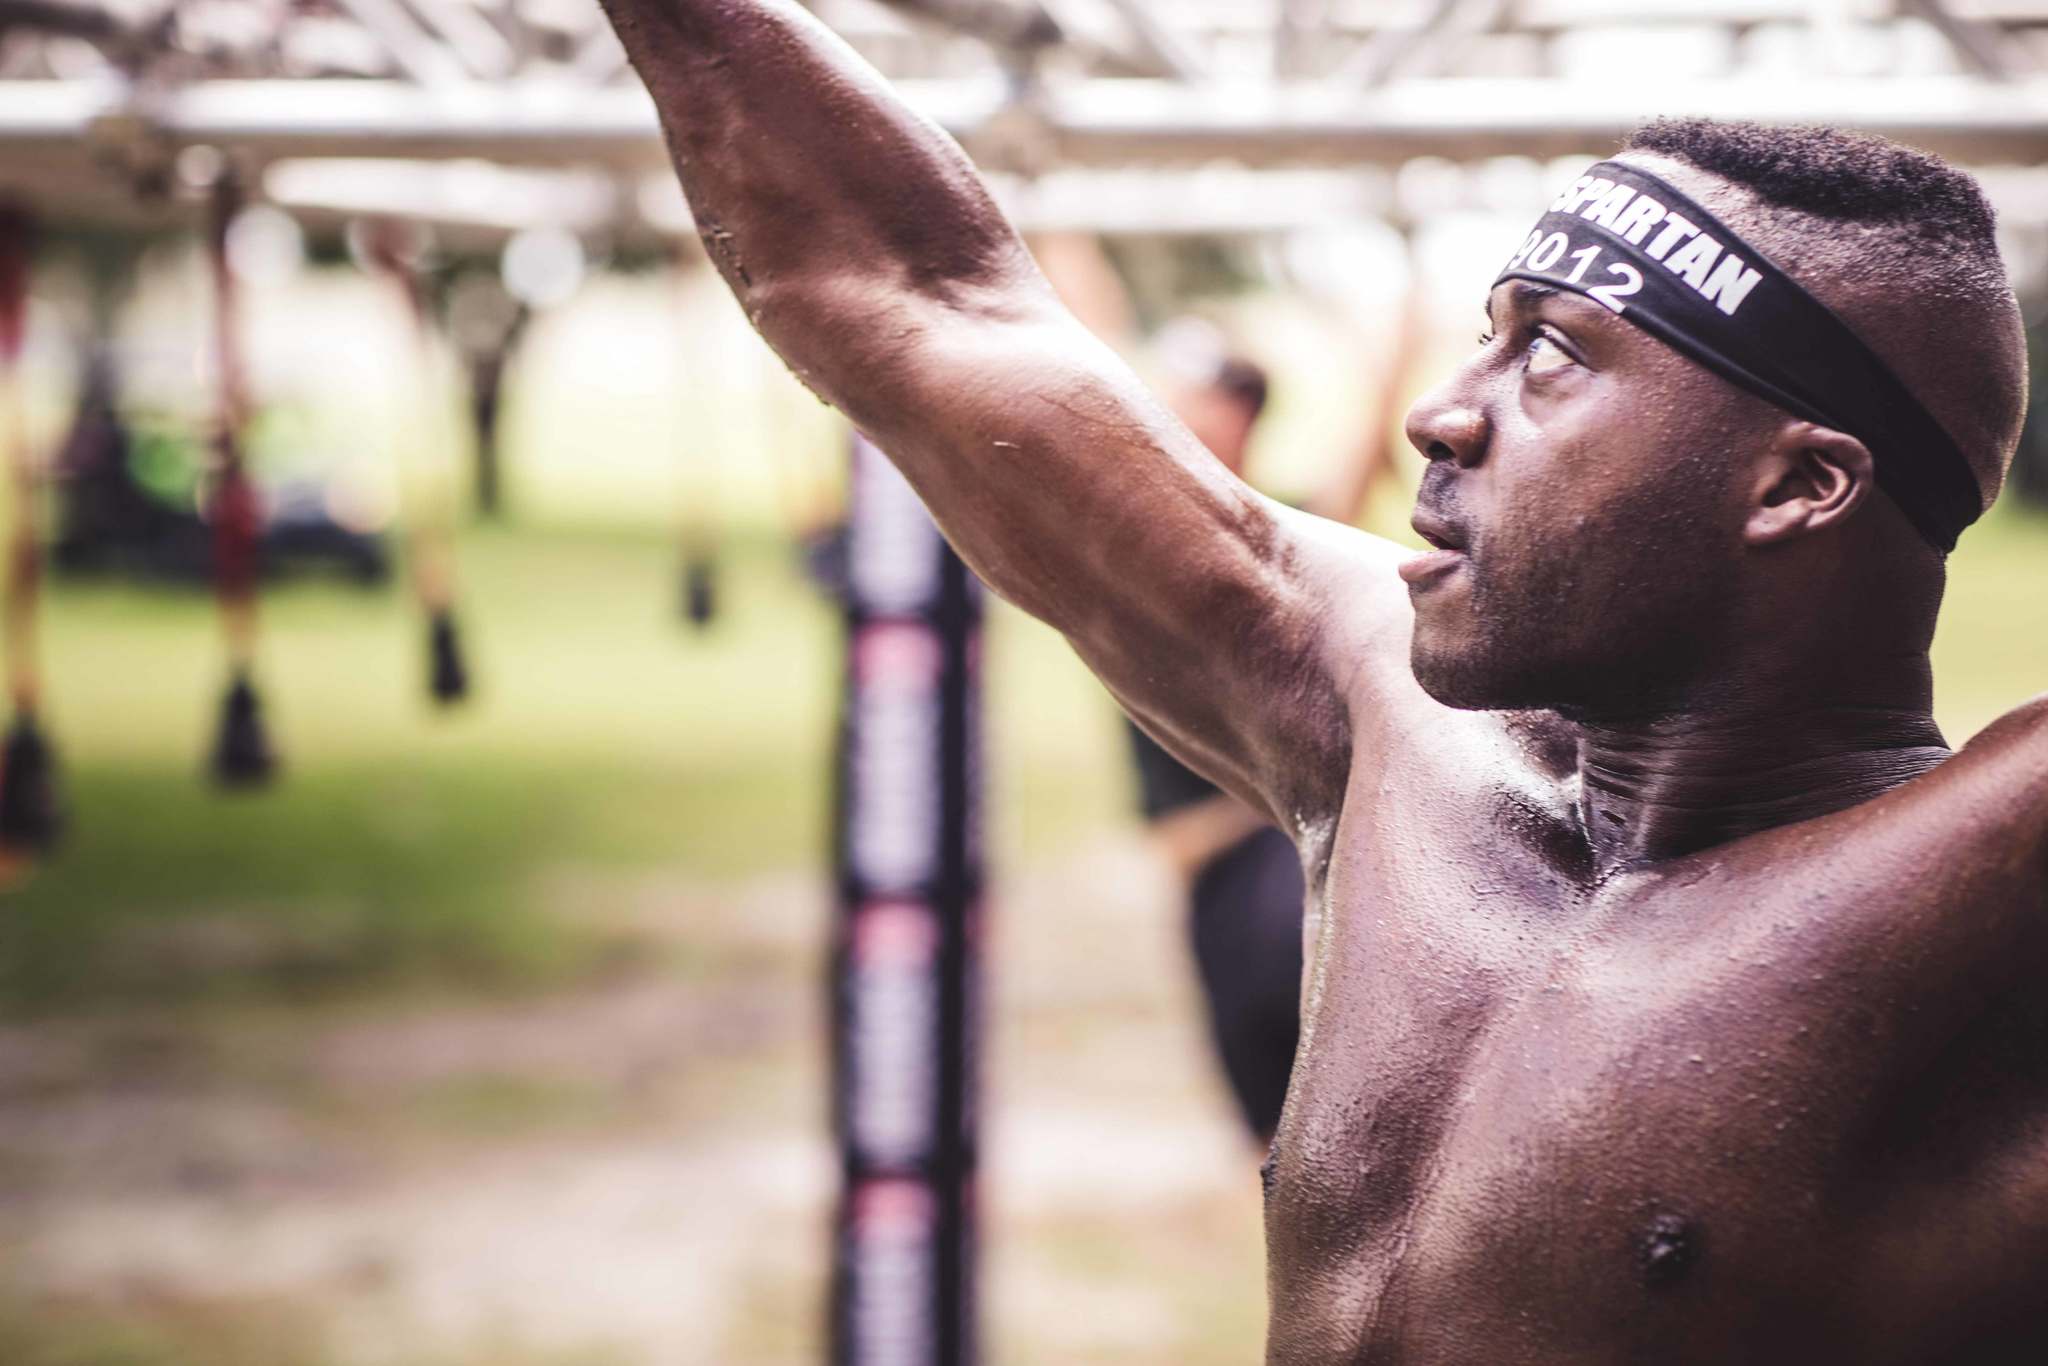 A Spartan racer is able to swing safely on the Monkey Bars and Multi-Rig, having prepared with exercises for IT band, ankle sprains, and shoulder mobility.